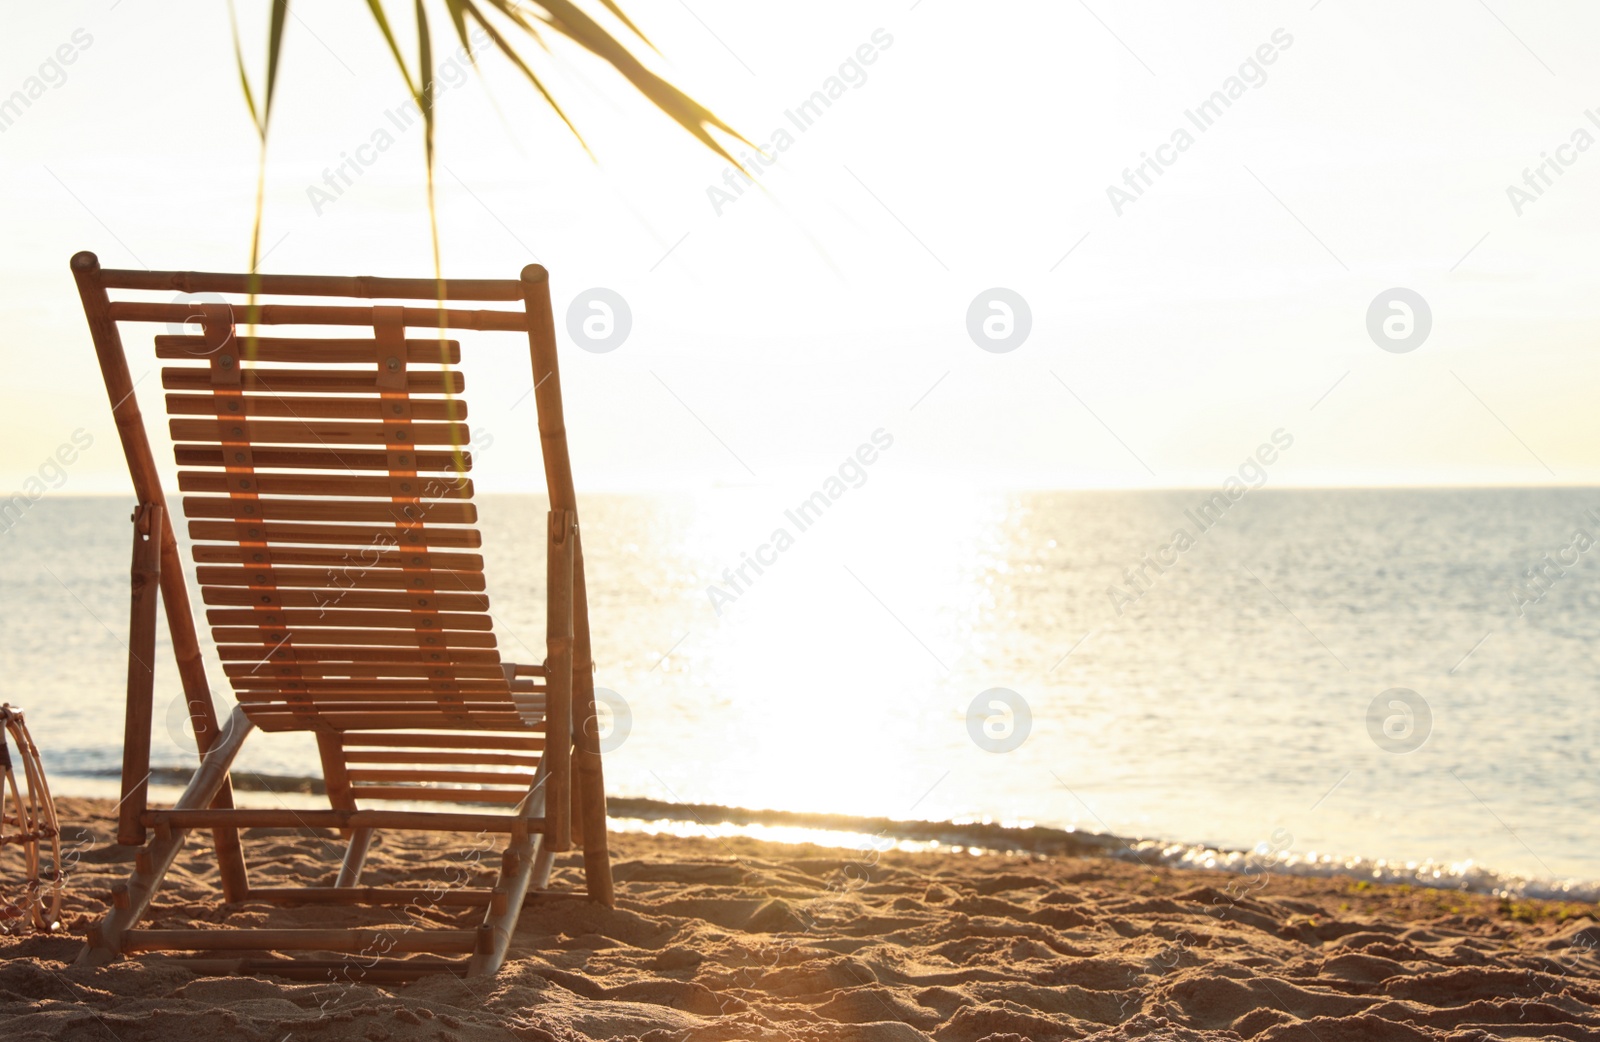 Photo of Wooden deck chair on sandy beach. Summer vacation